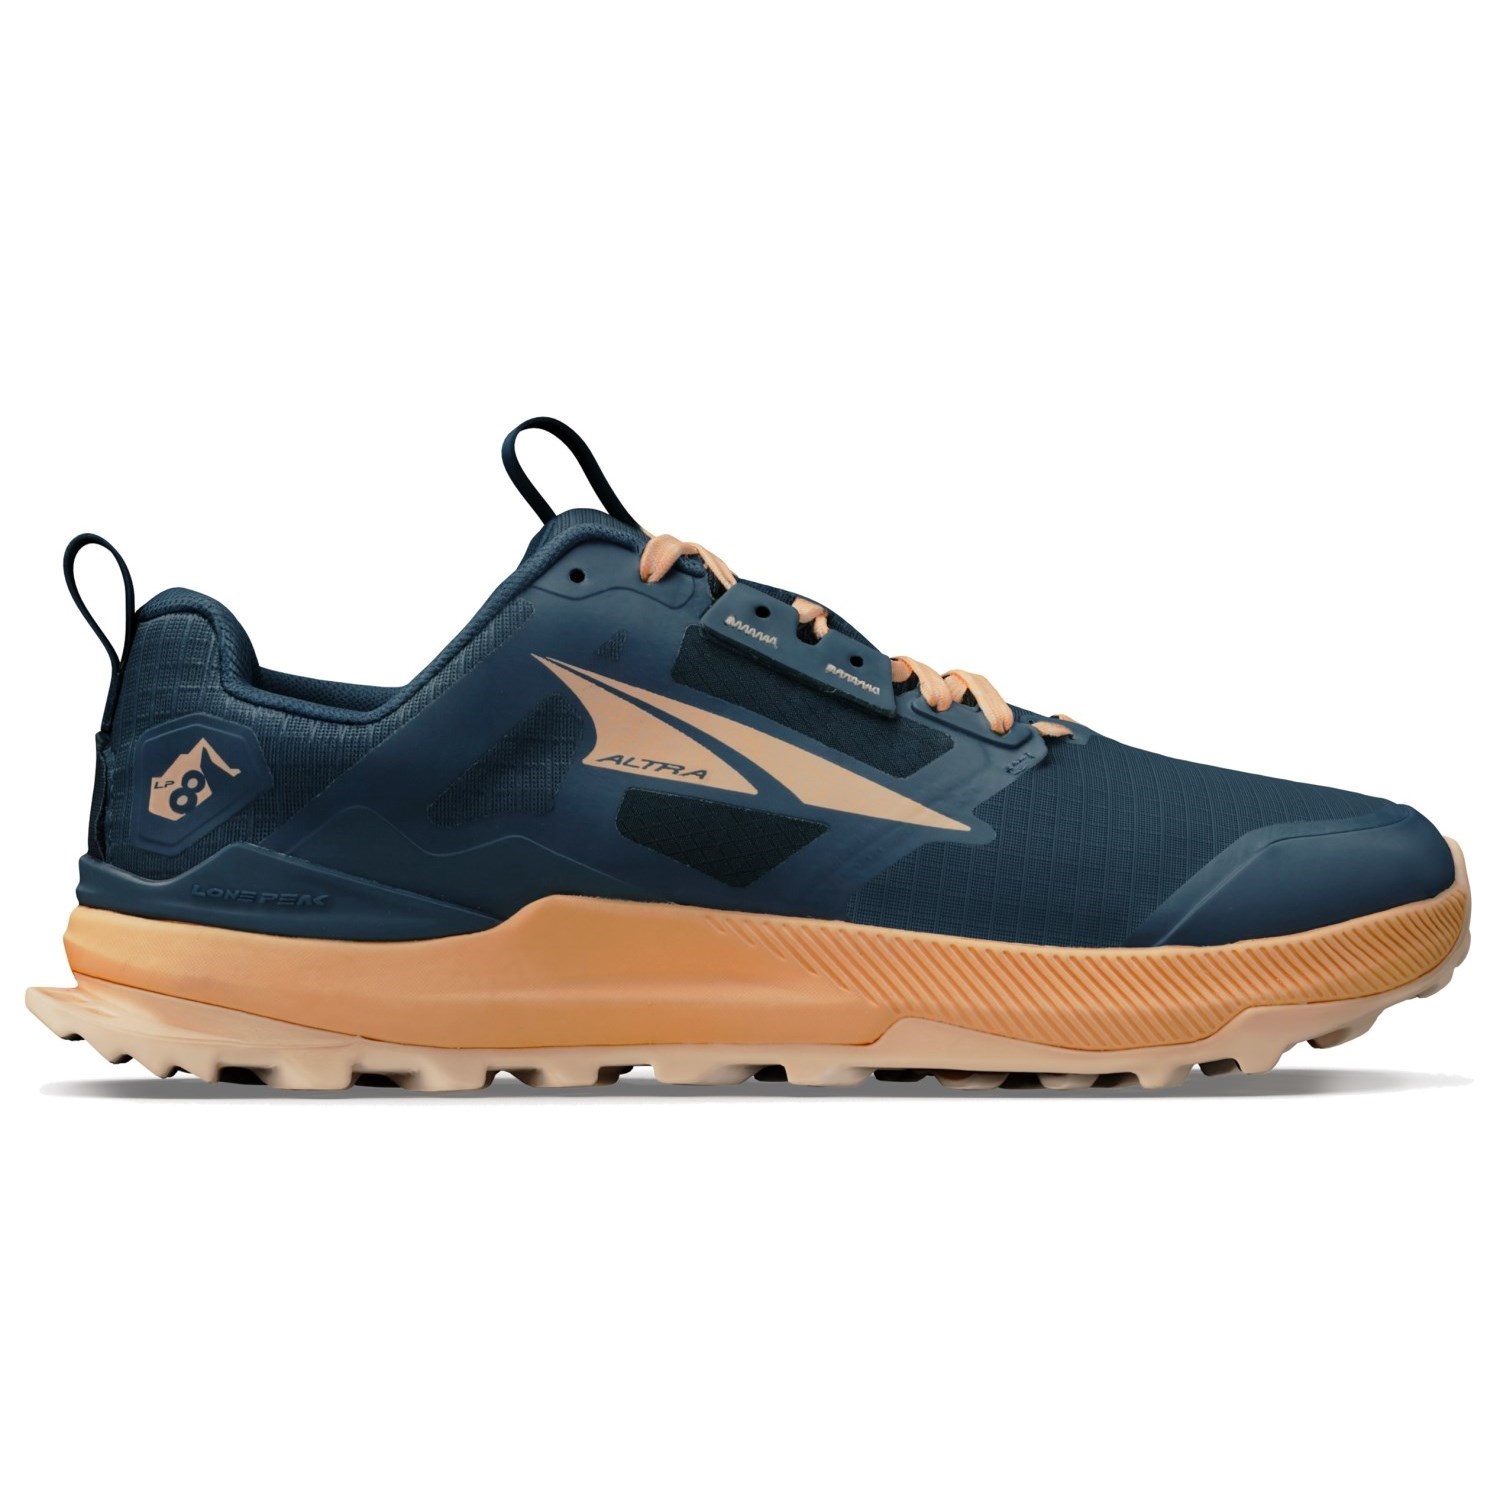 Altra Lone Peak 8 - Womens Trail Running Shoes - Navy/Coral | Sportitude